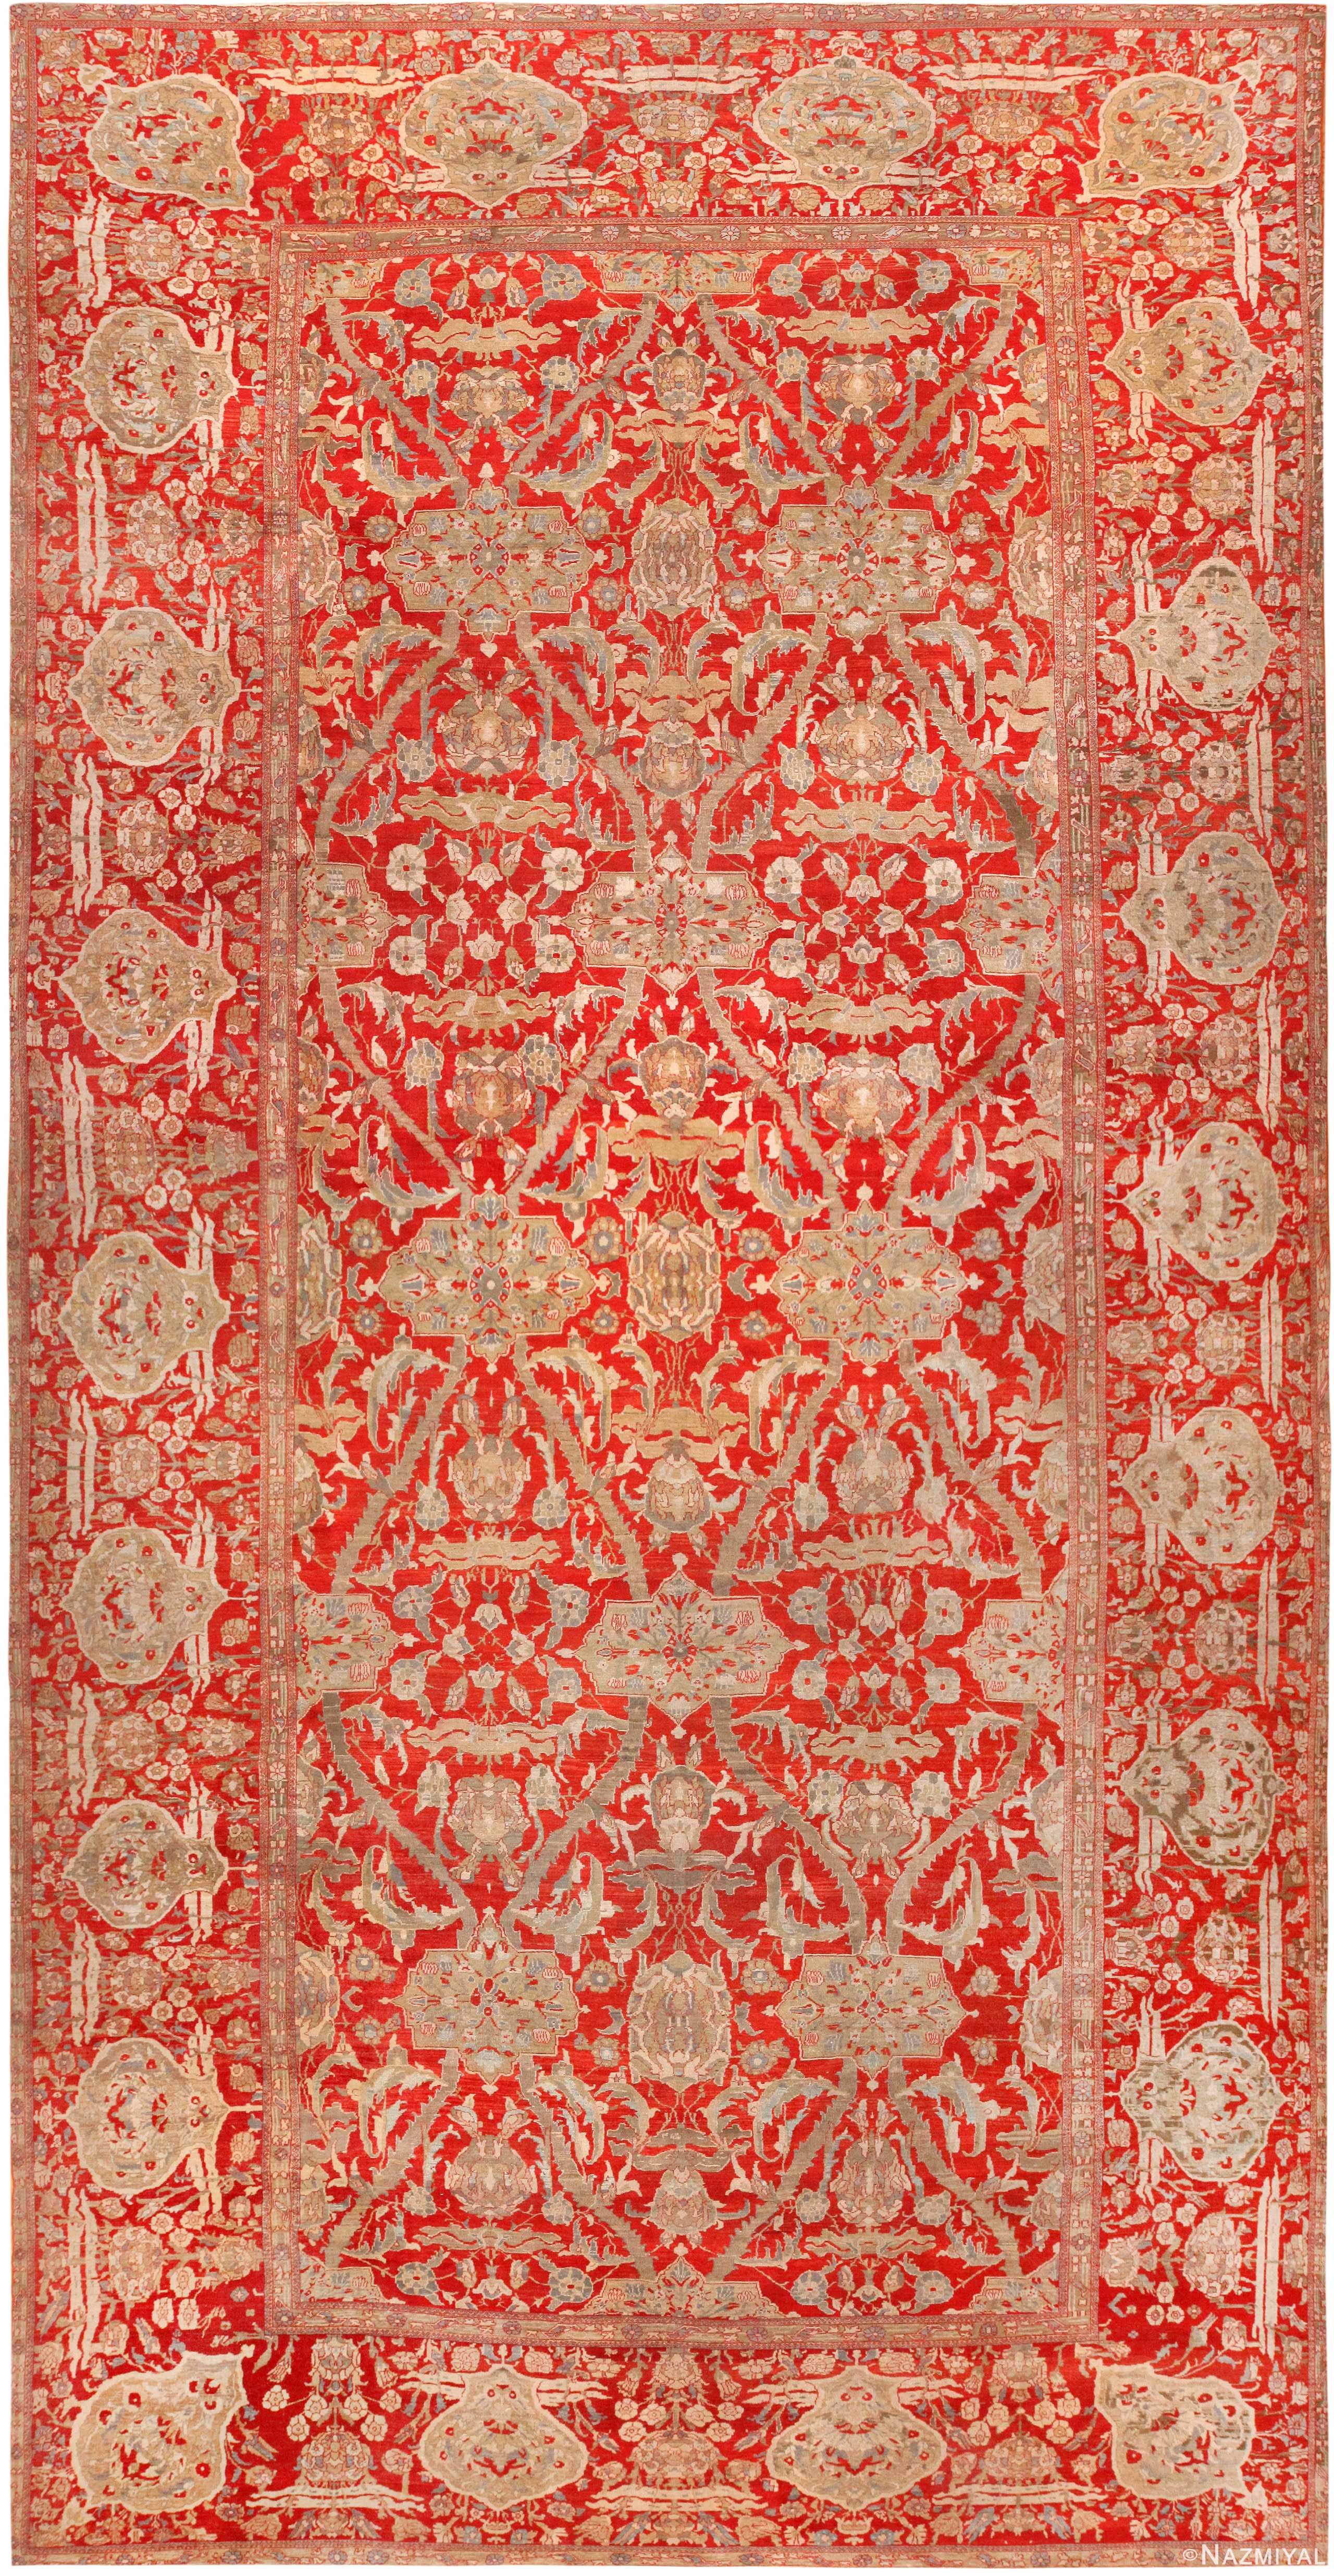 red carpeting rugs textures seamless - 21 textures  Carpet texture seamless,  Rug texture, Carpet texture